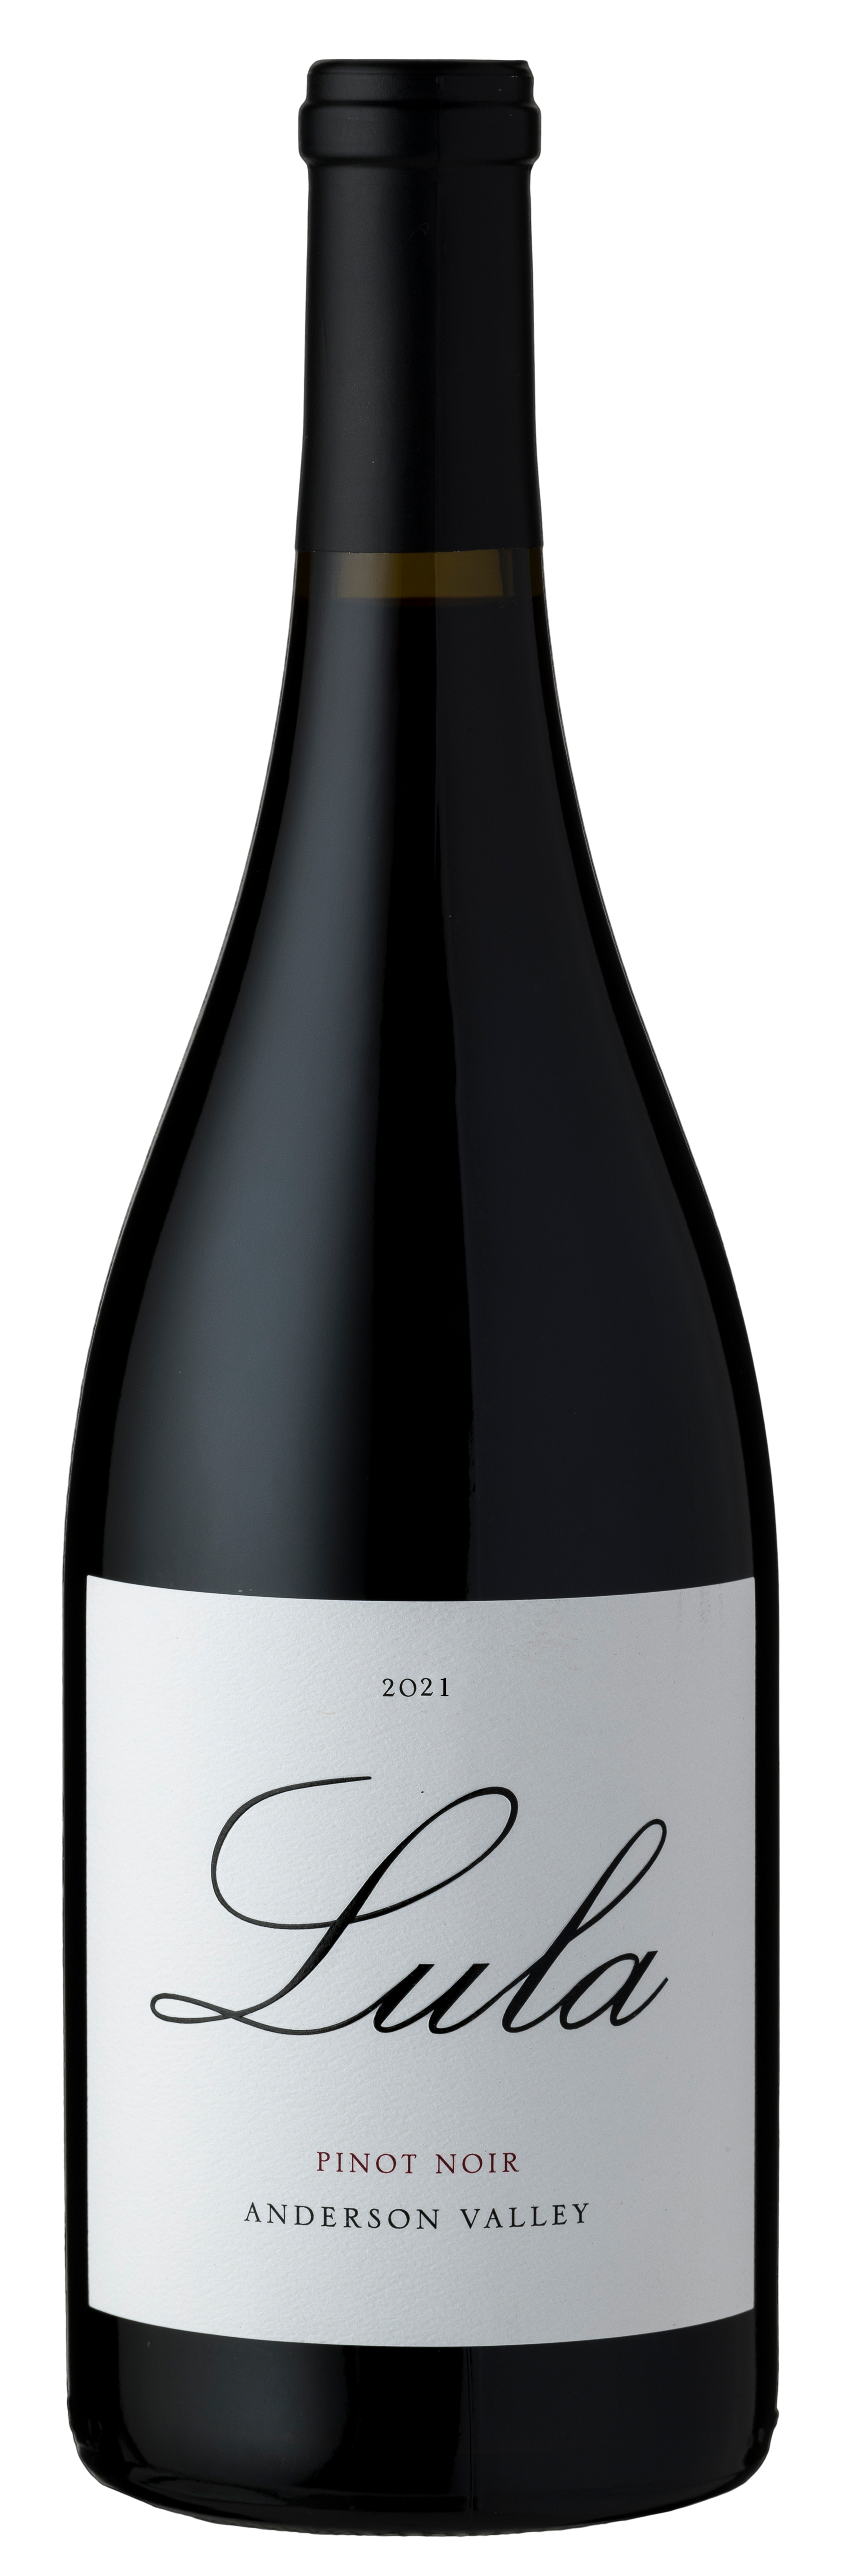 Product Image for 2021 Anderson Valley Pinot Noir